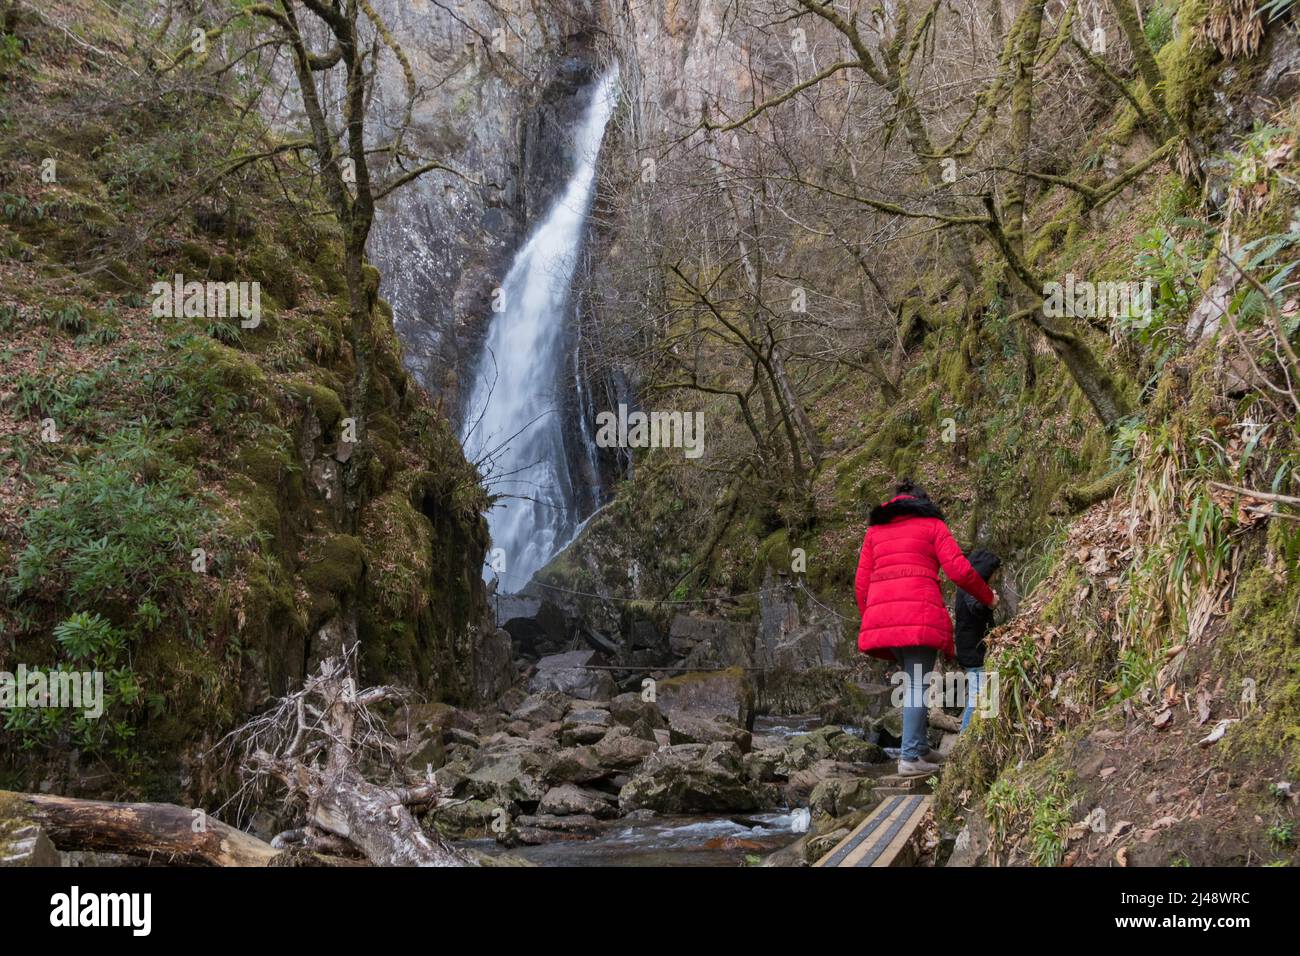 People walking along a slippery path leading to Gray Mare's Tail, one of the most impressive waterfalls in Scotland, UK Stock Photo